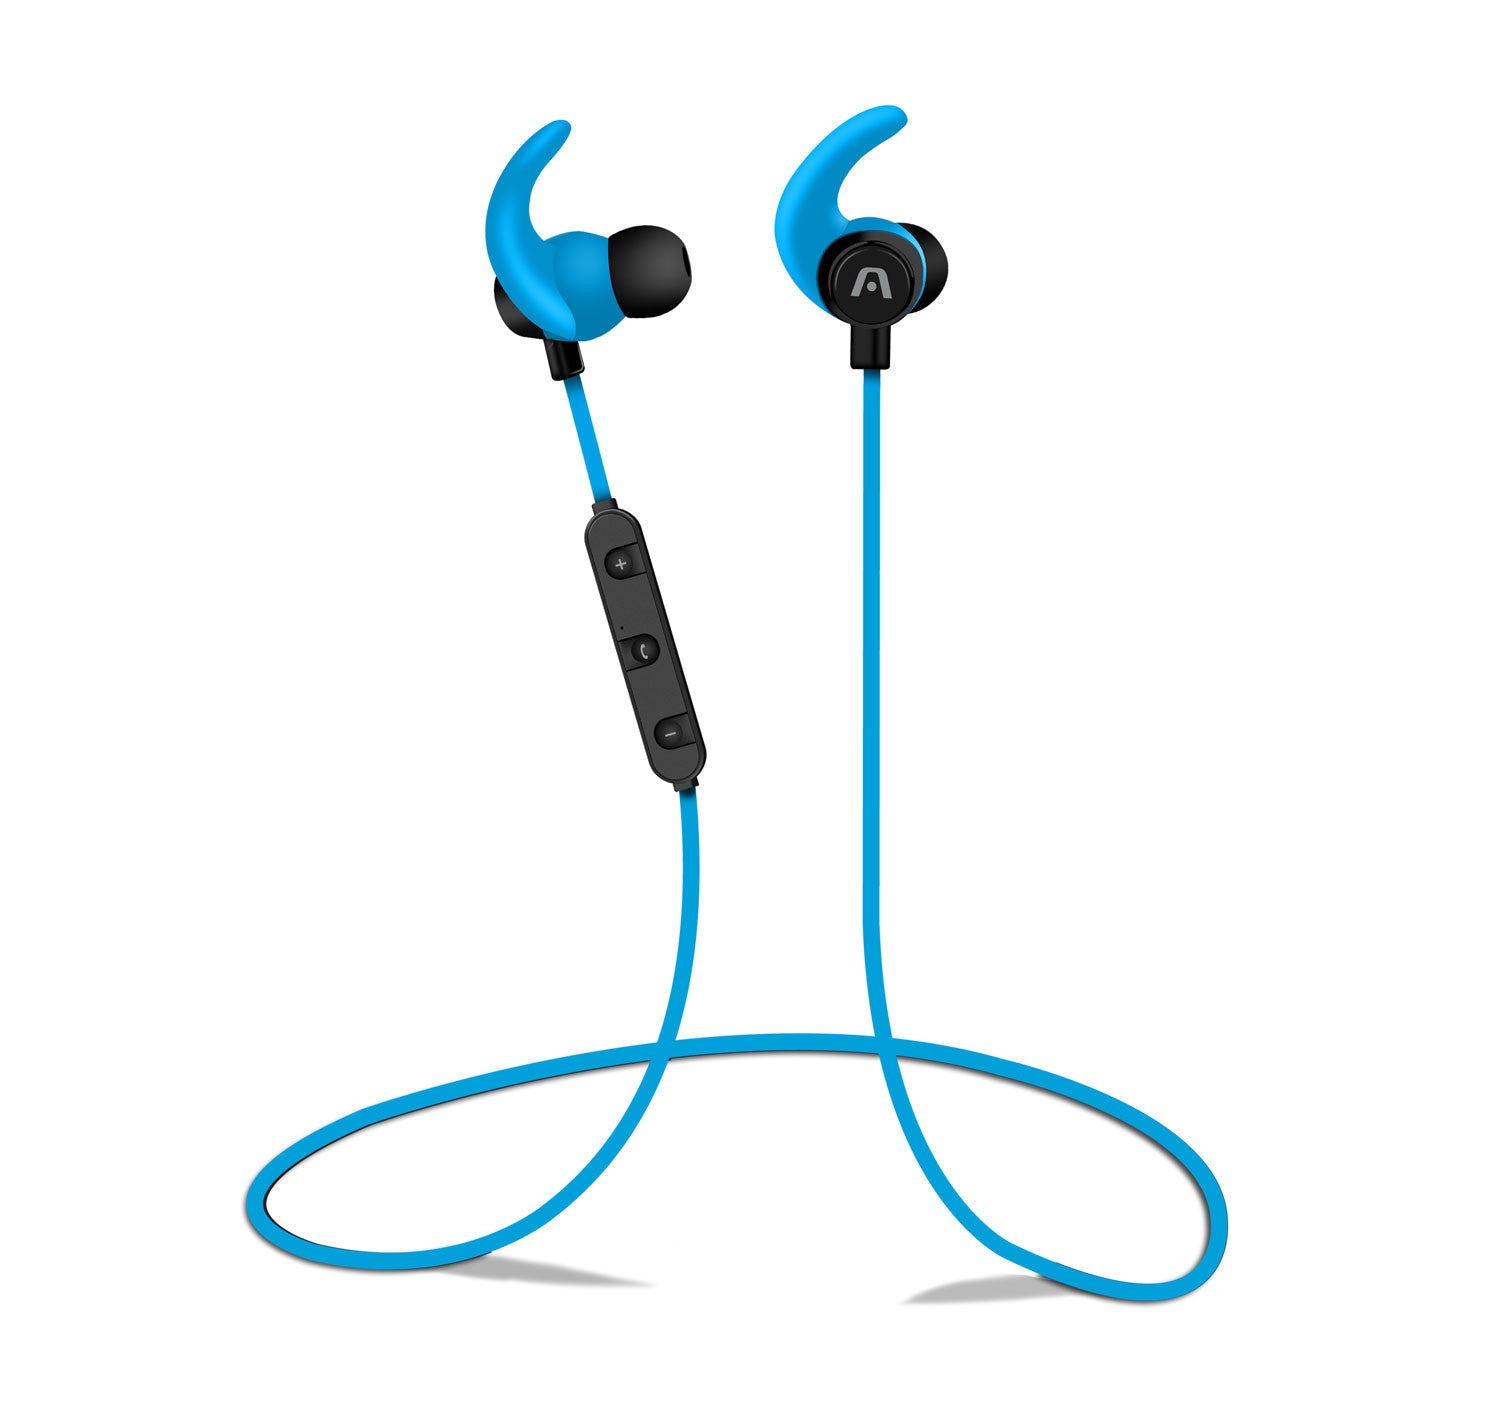 Ultimate Sound Fit BT Earbuds